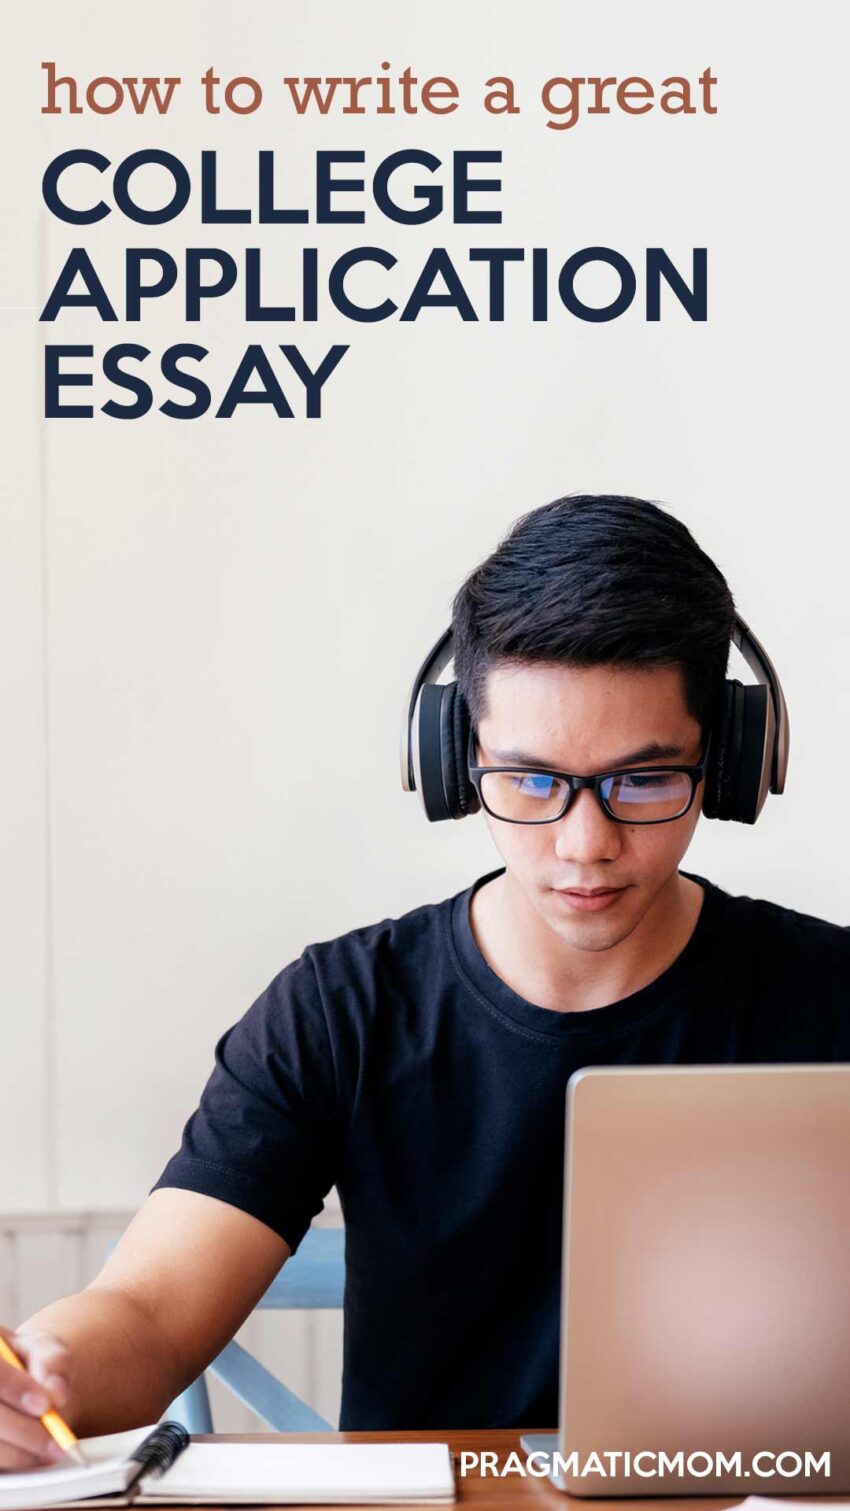 How To Write a Great College Application Essay